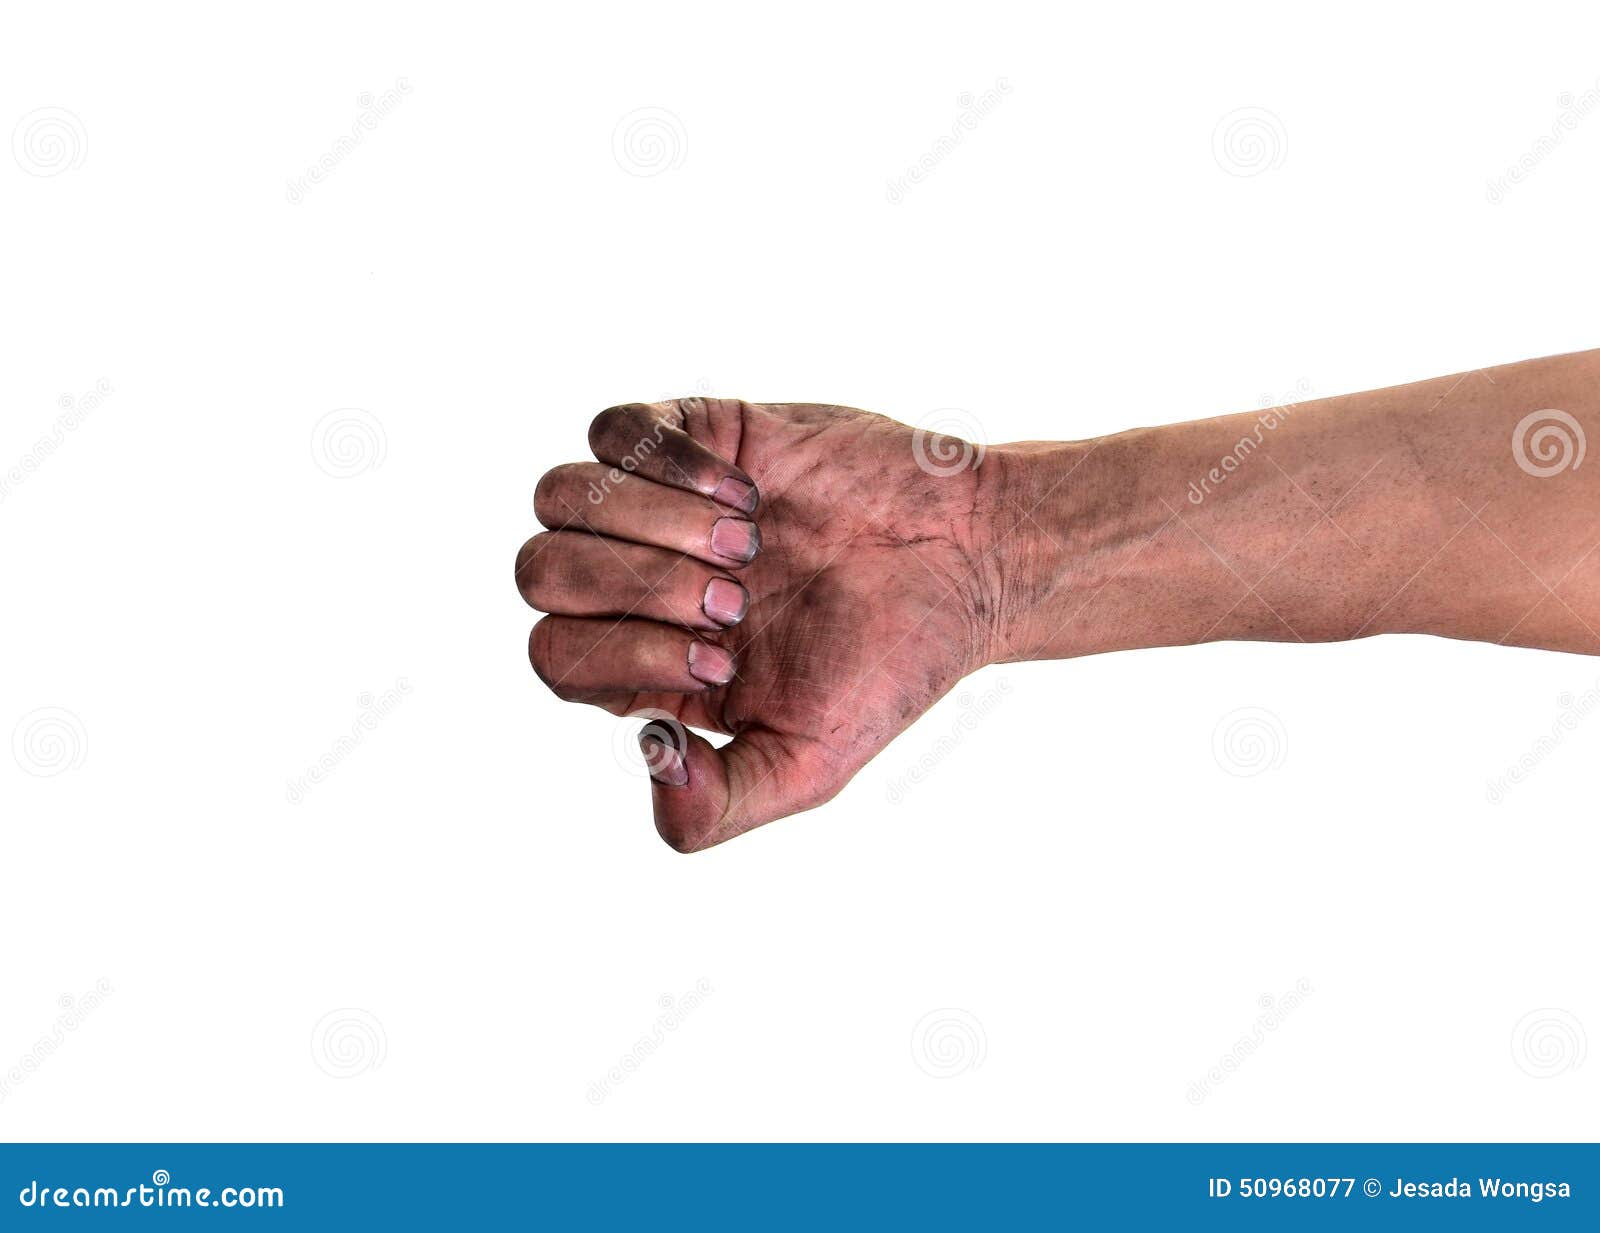 Dirty Fingernails His Hands Are Dirty With Dirt Lodged In The Nails Bacteria Under Nails Stock Image Image Of Painful Isolated